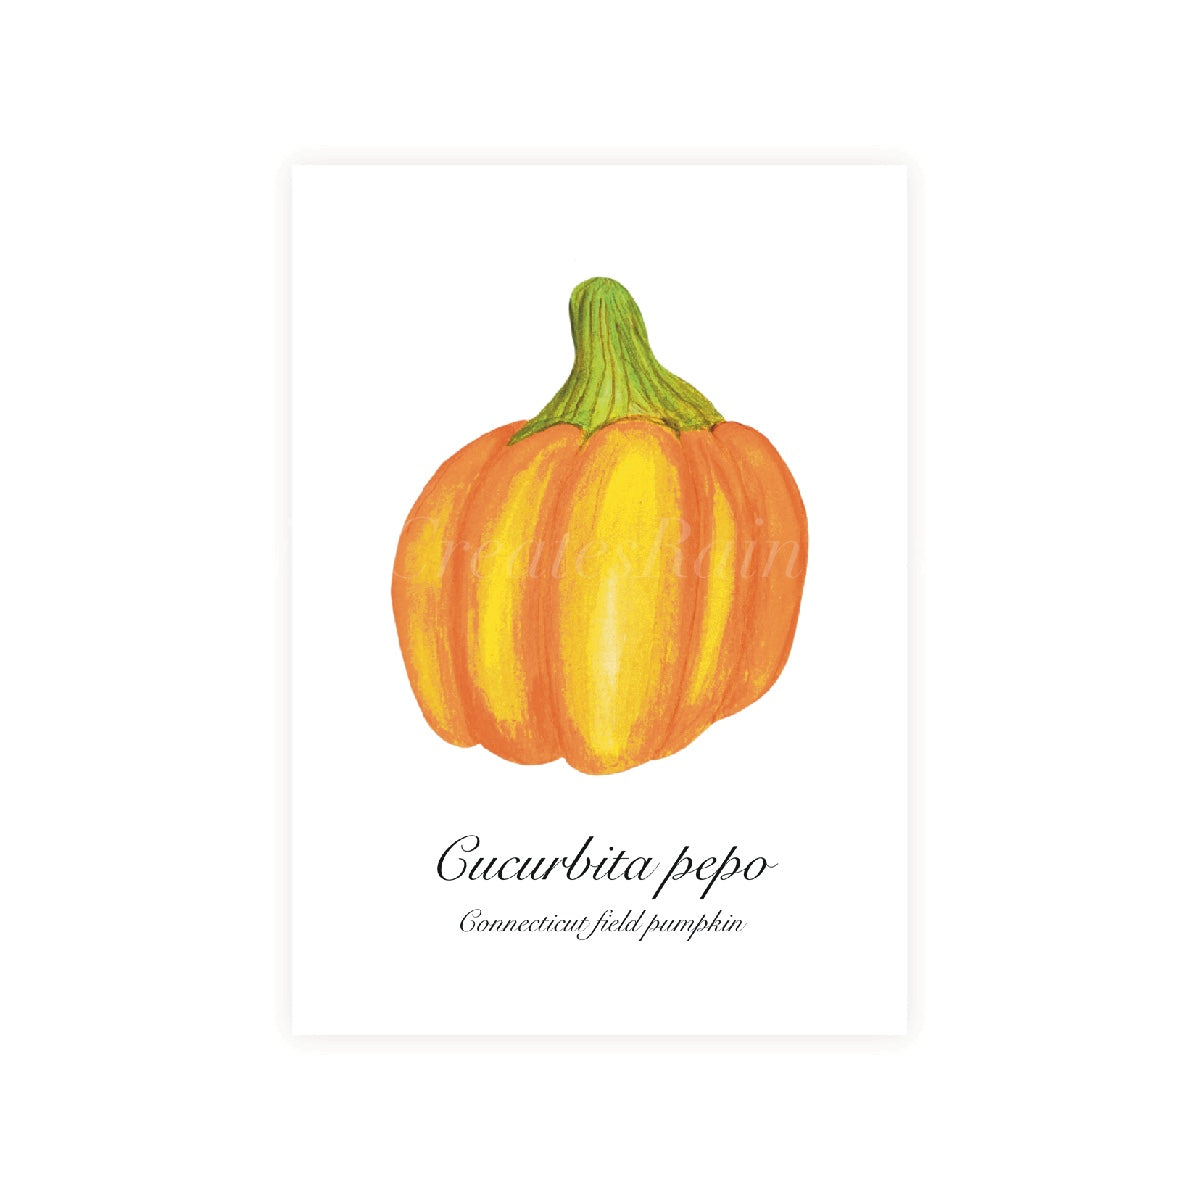 Connecticut field pumpkin painted in watercolour with Latin and common name on a white background